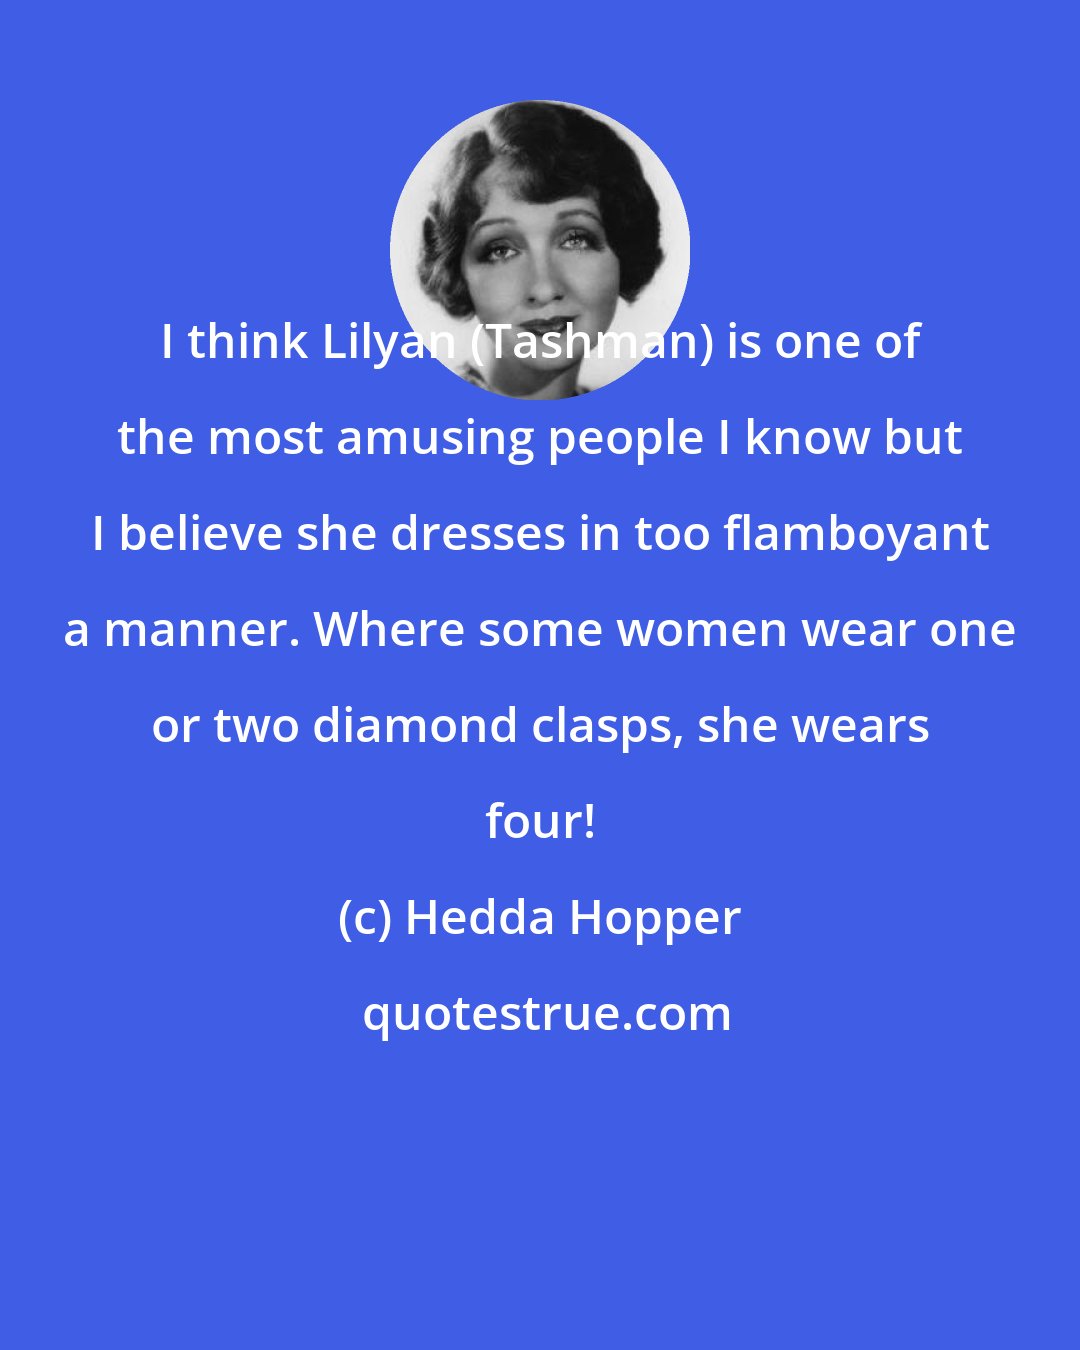 Hedda Hopper: I think Lilyan (Tashman) is one of the most amusing people I know but I believe she dresses in too flamboyant a manner. Where some women wear one or two diamond clasps, she wears four!